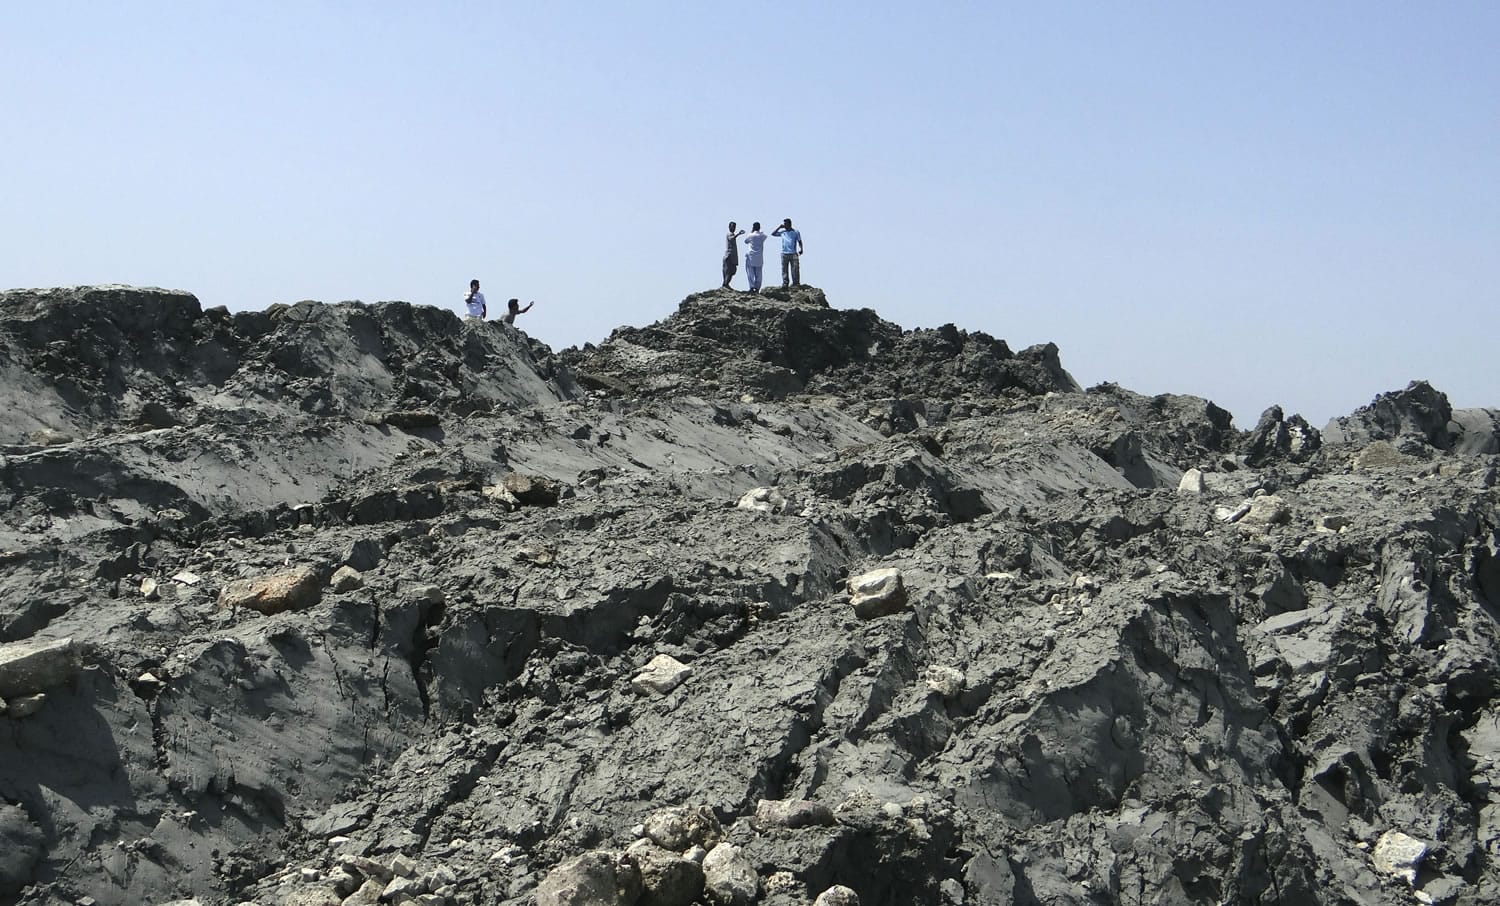 In this photo released by the Gwadar local government office on Wednesday, people walk on an island that reportedly emerged off the Gwadar coastline in the Arabian Sea.